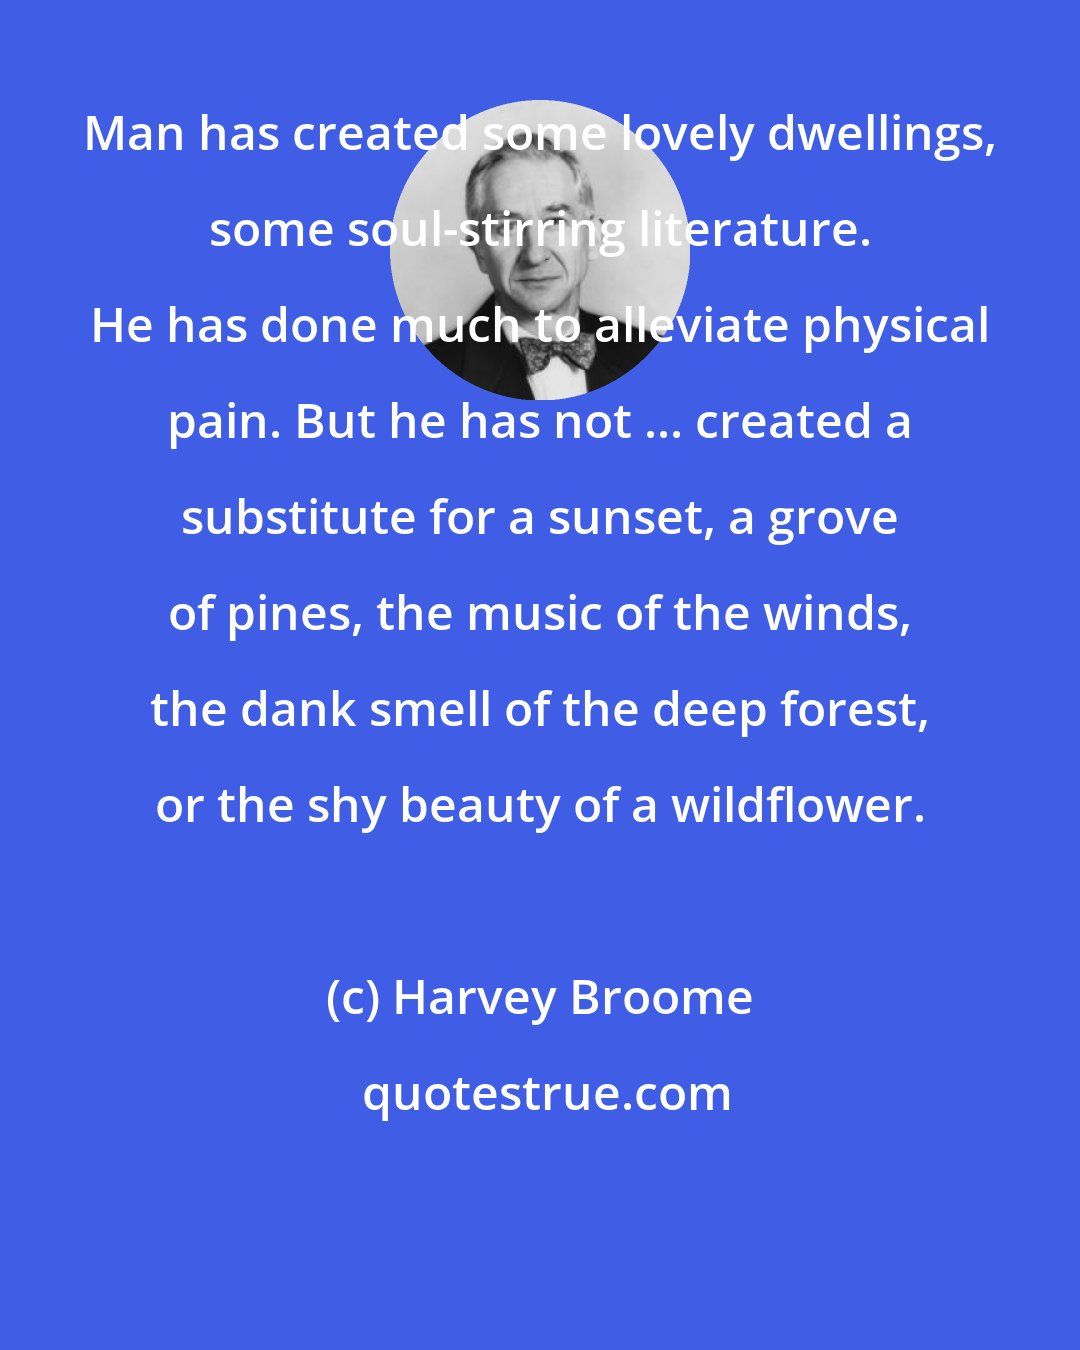 Harvey Broome: Man has created some lovely dwellings, some soul-stirring literature. He has done much to alleviate physical pain. But he has not ... created a substitute for a sunset, a grove of pines, the music of the winds, the dank smell of the deep forest, or the shy beauty of a wildflower.